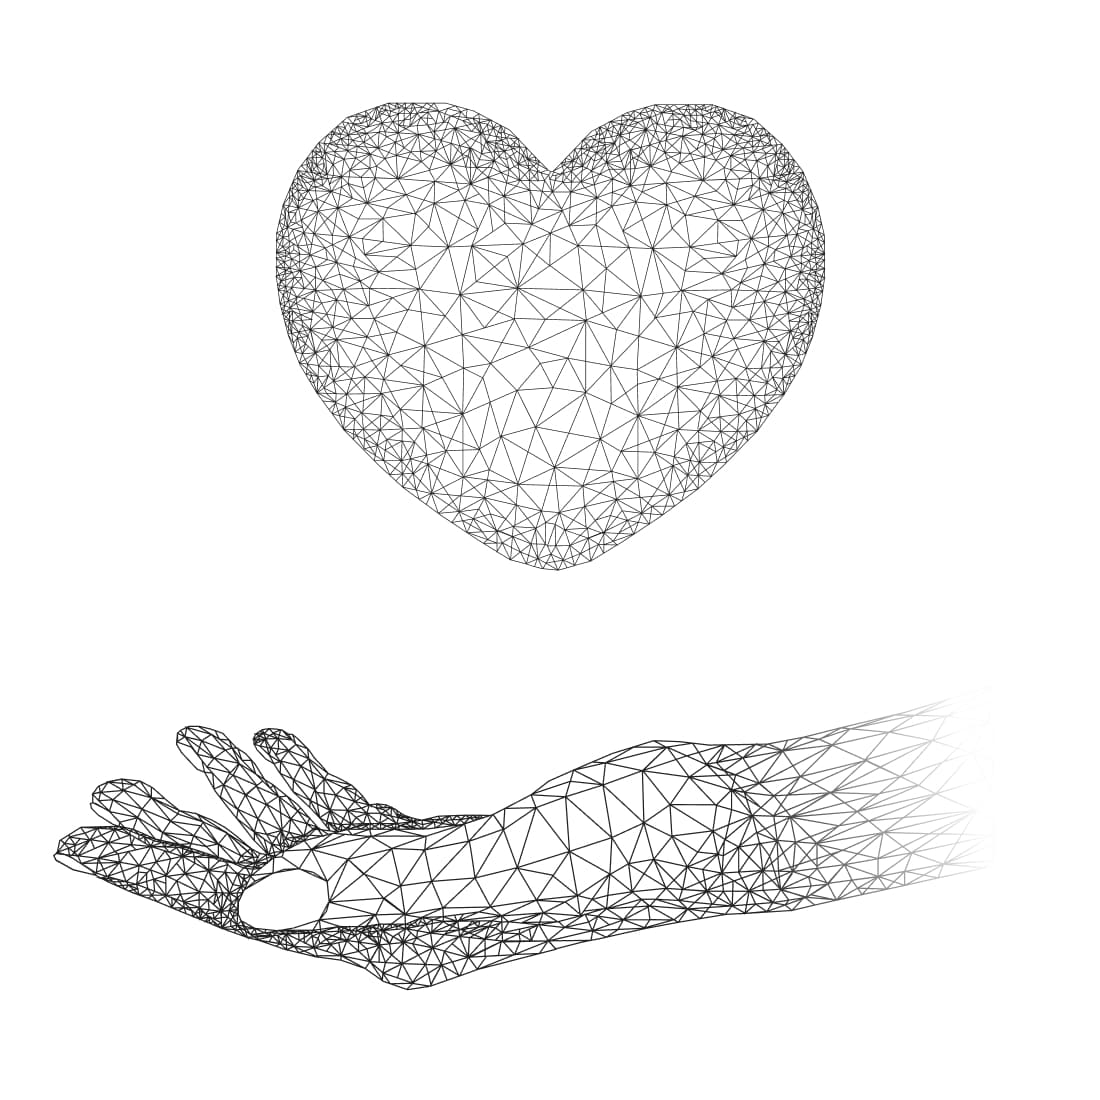 Polygonal Hand, Hearth. AI, EPS, FIG, PNG cover image.